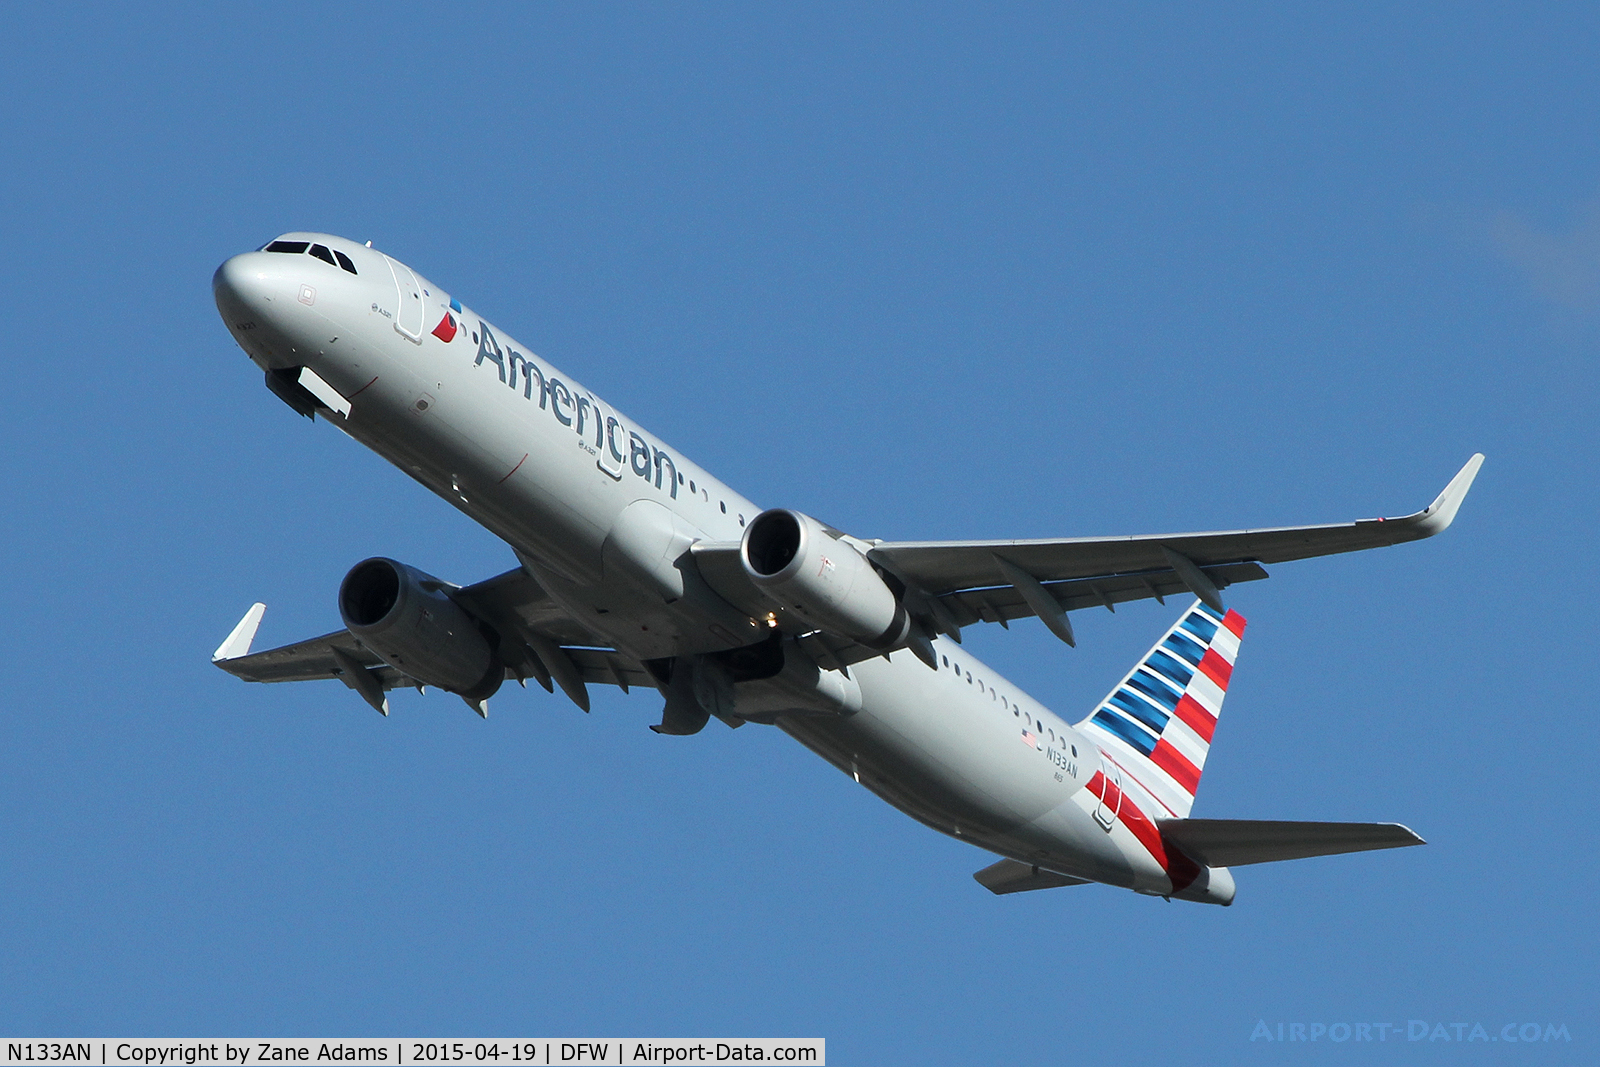 N133AN, 2015 Airbus A321-200 C/N 6482, American Airlines A321 departing DFW Airport